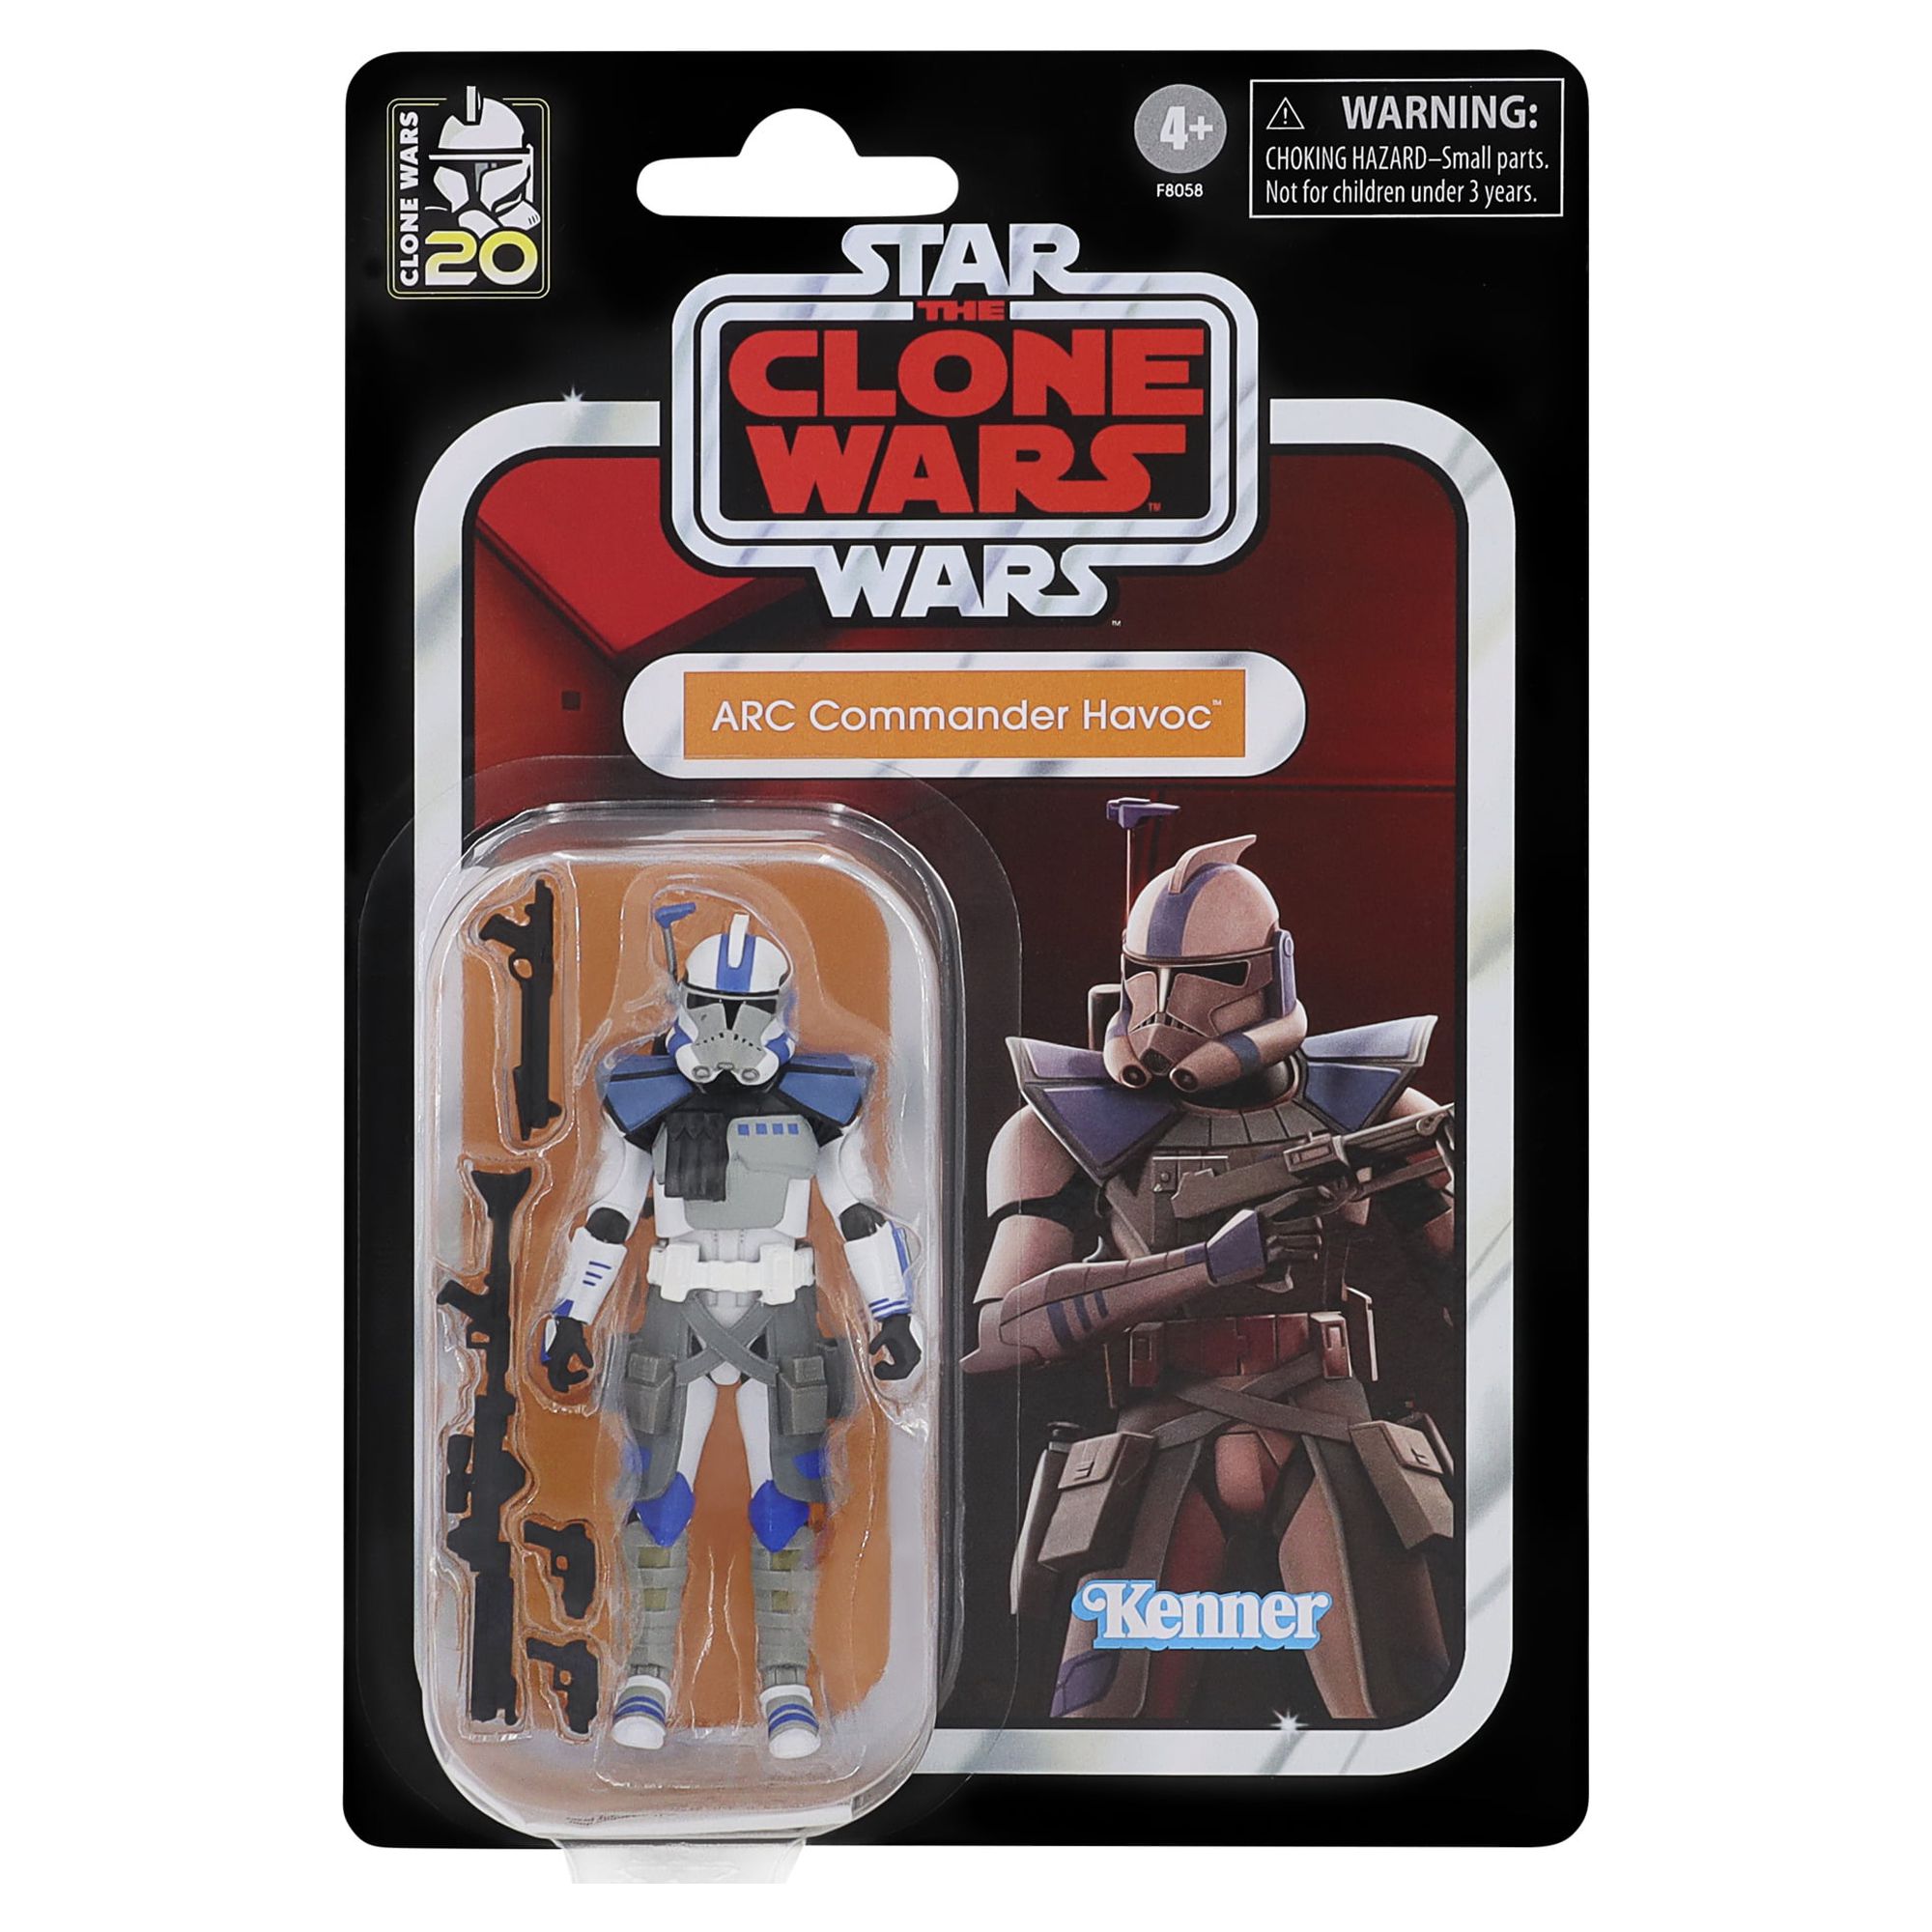 Star Wars: The Clone Wars The Vintage Collection ARC Commander Havoc Kids Toy Action Figure for Boys and Girls Ages 4 5 6 7 8 and Up (3.75”) - image 2 of 10